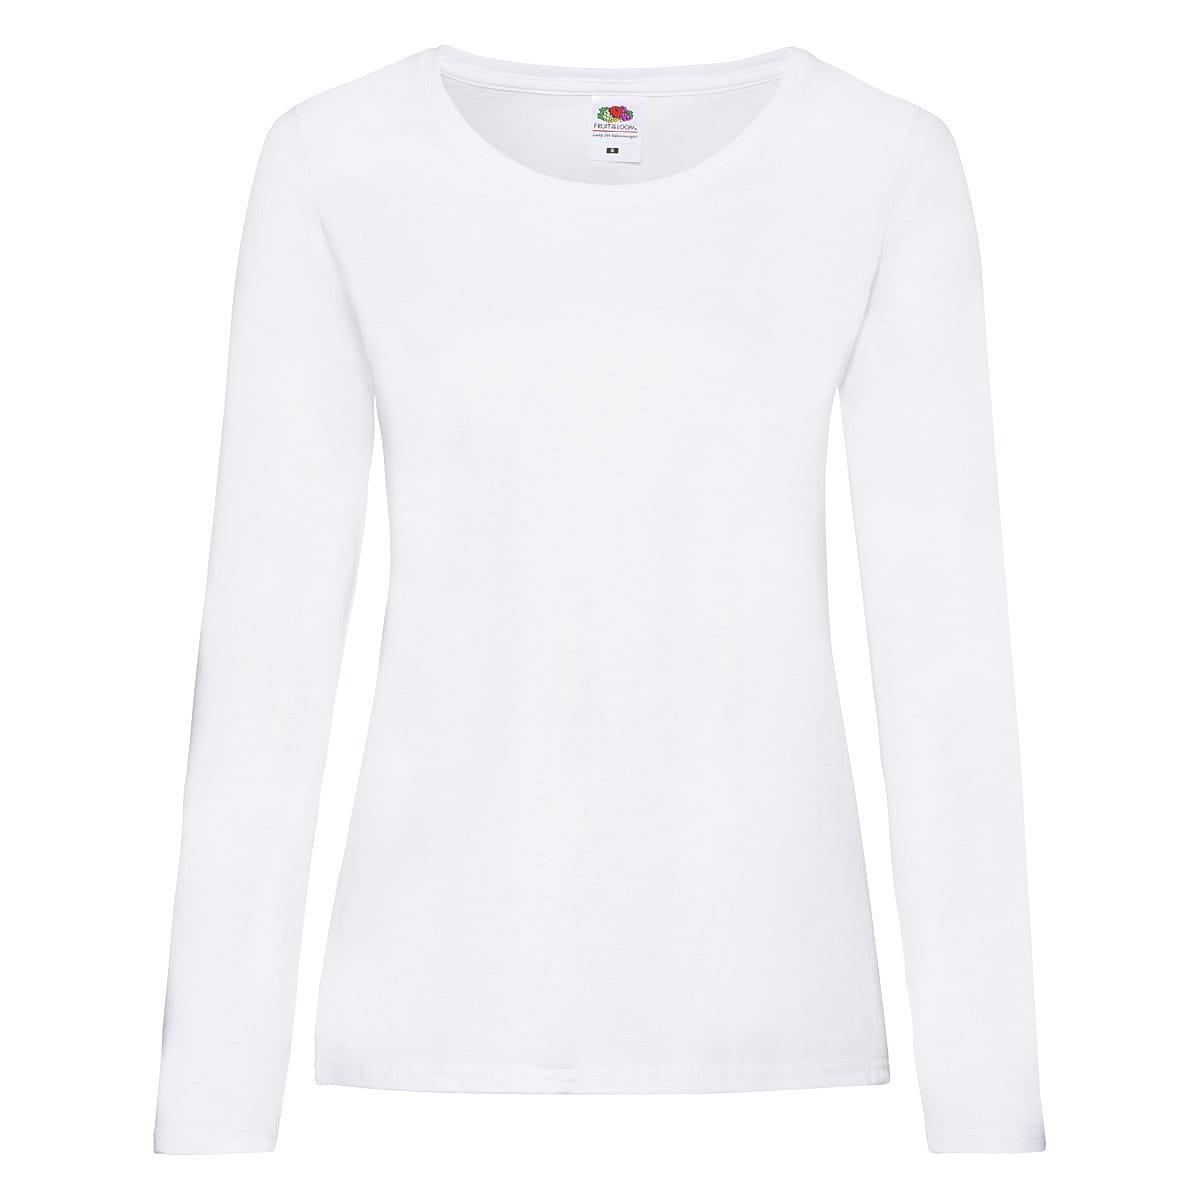 Fruit Of The Loom Lady-Fit Valueweight Long-Sleeve T-Shirt in White (Product Code: 61404)